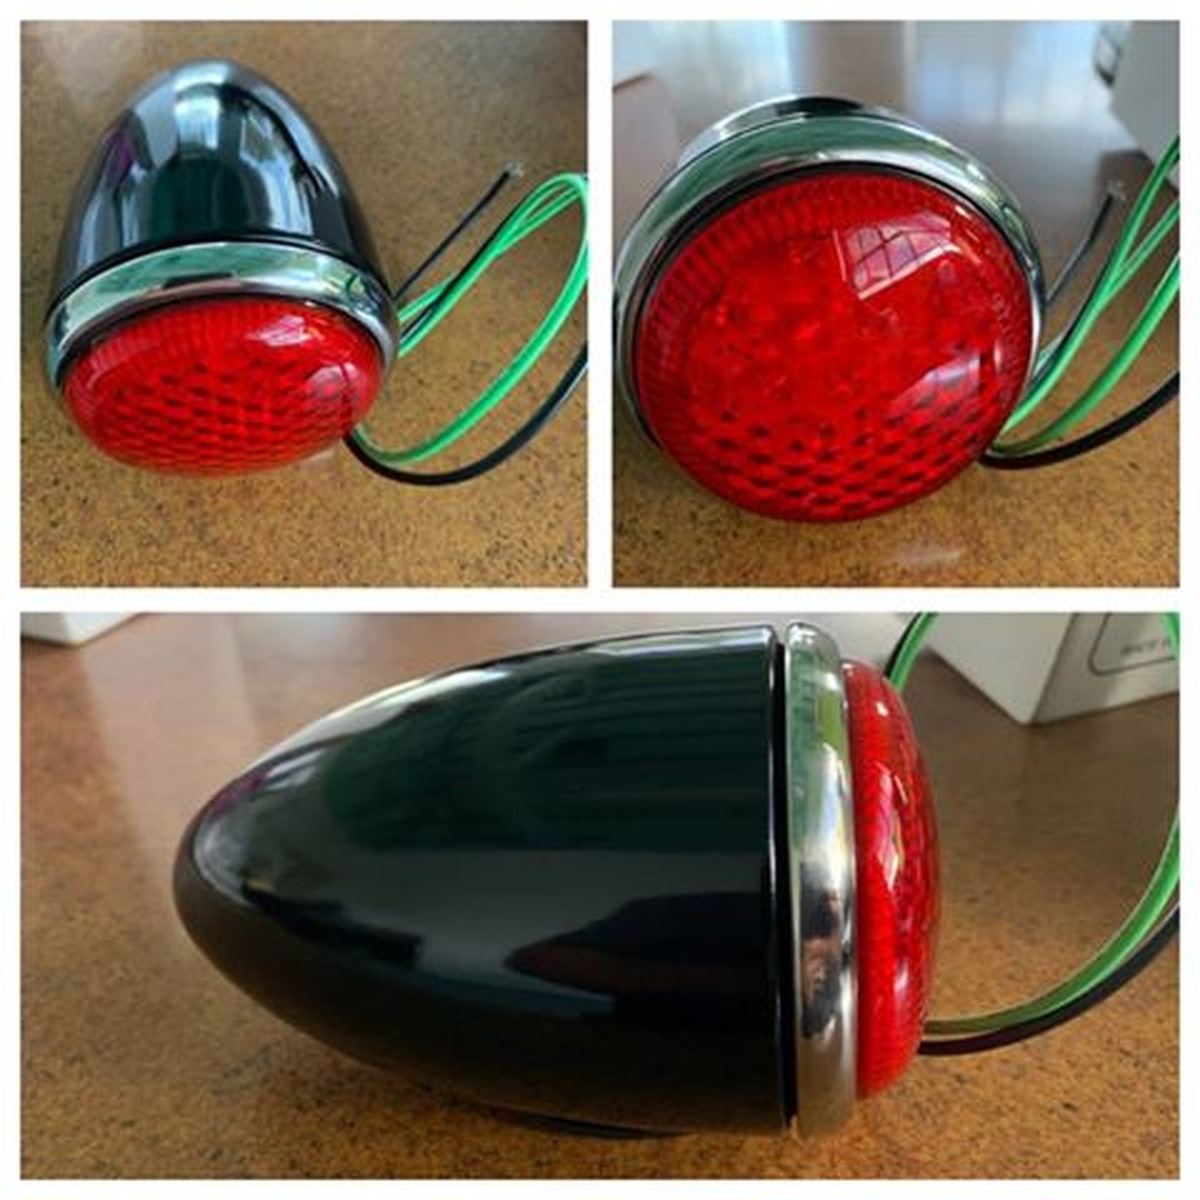 Ford Tail Lights - 1937 Passenger Car Right hand Tail Lamp 12 volt - Black housing and Stainless Steal Rim